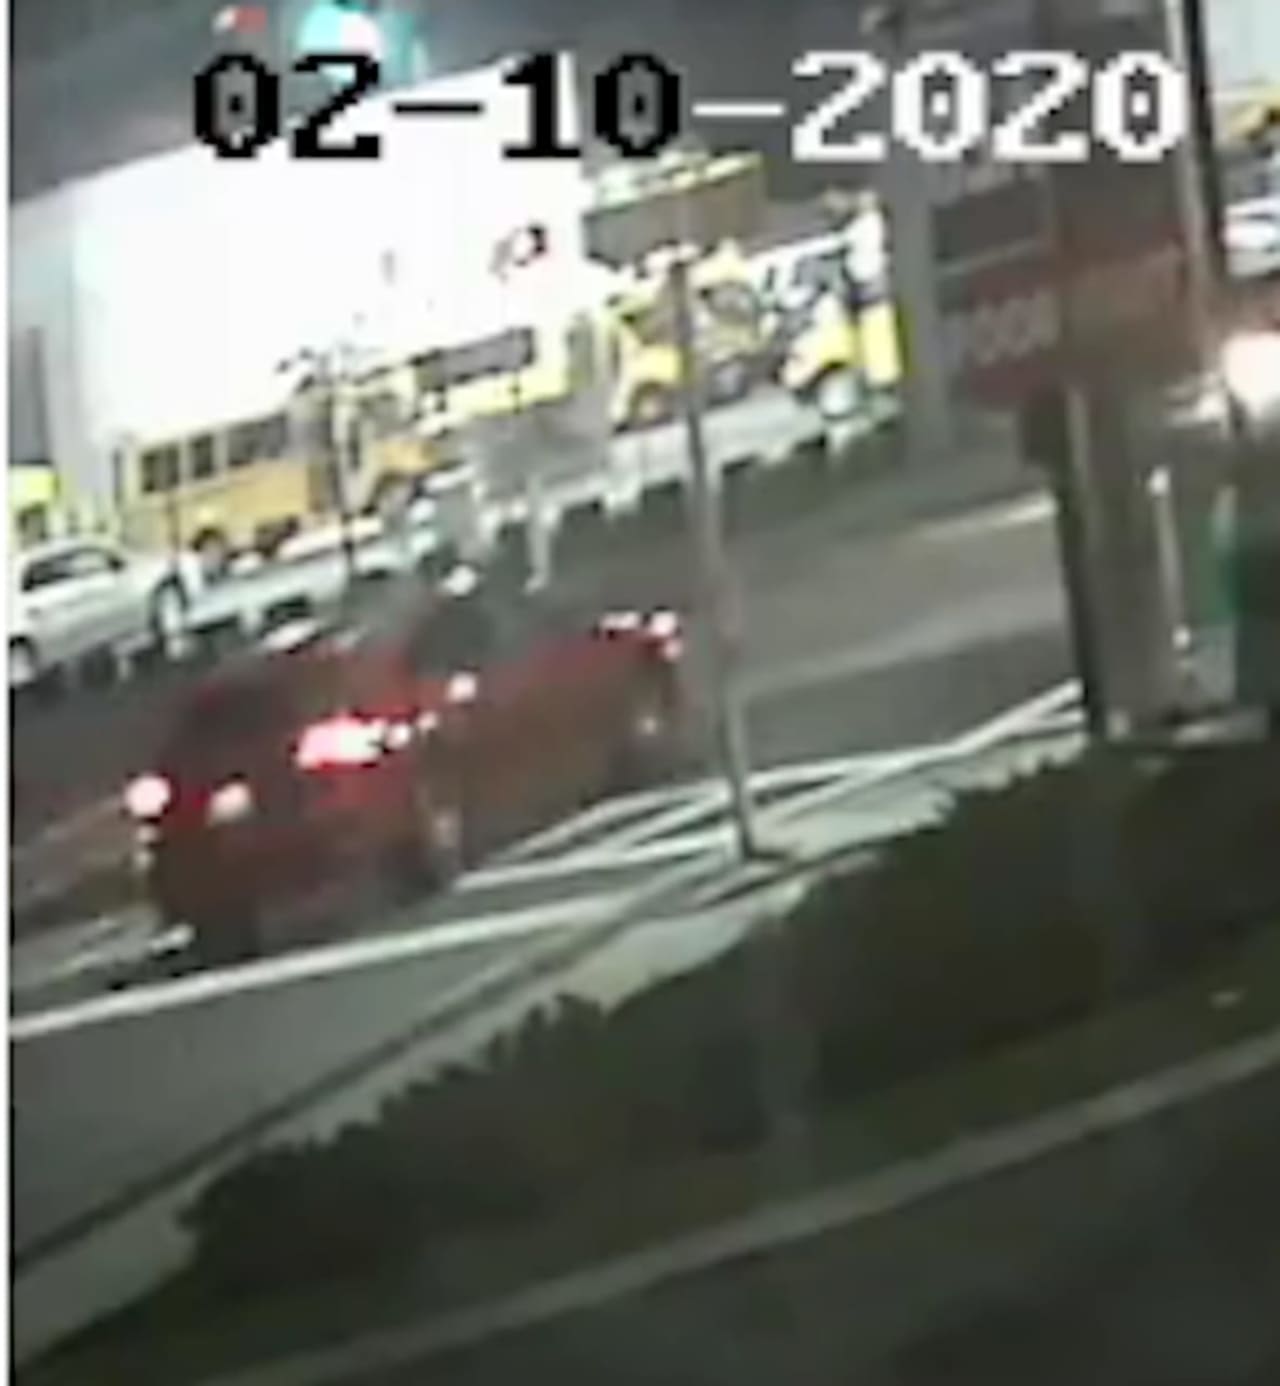 A photo of the red SUV (shown above) released by police.